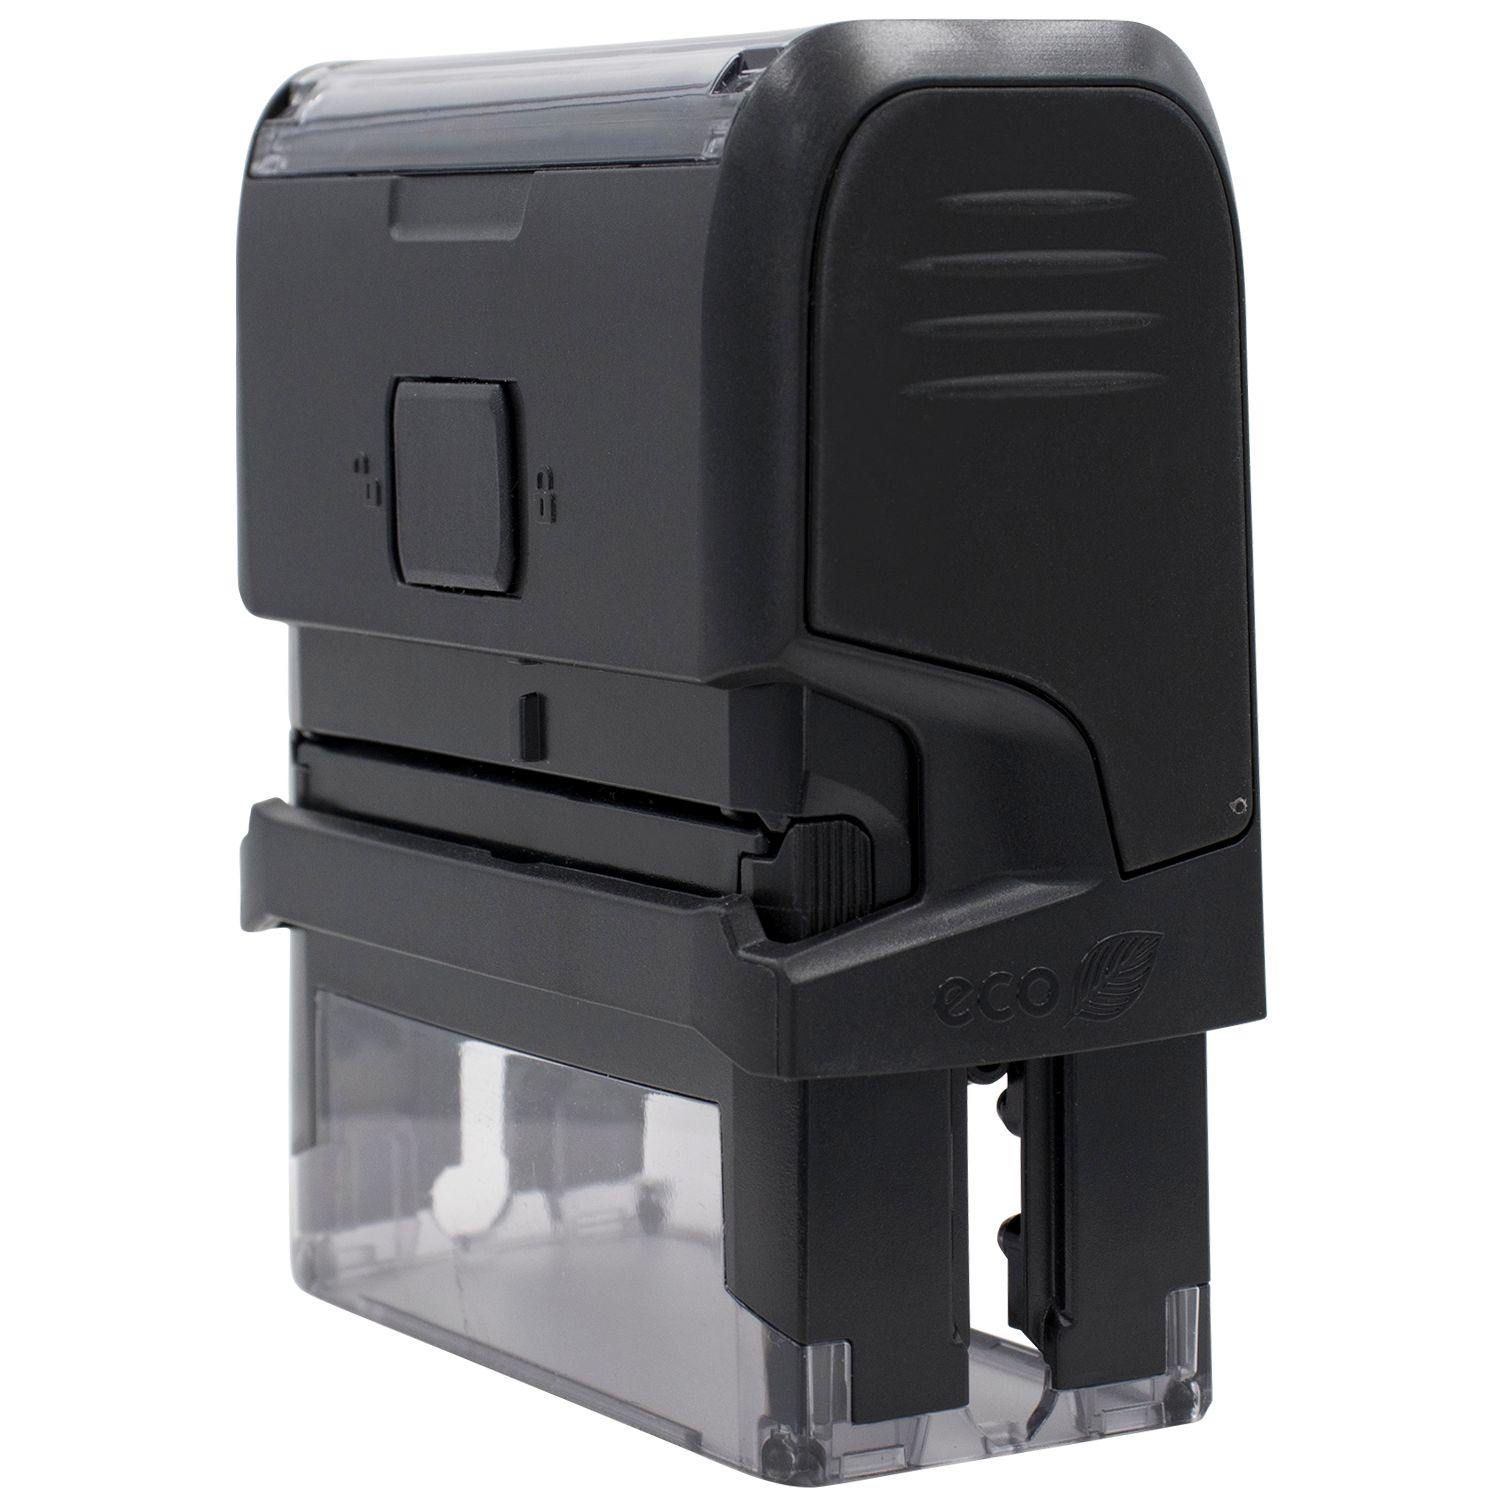 Self Inking States Exhibit Stamp - Engineer Seal Stamps - Brand_Trodat, Impression Size_Small, Stamp Type_Self-Inking Stamp, Type of Use_Legal